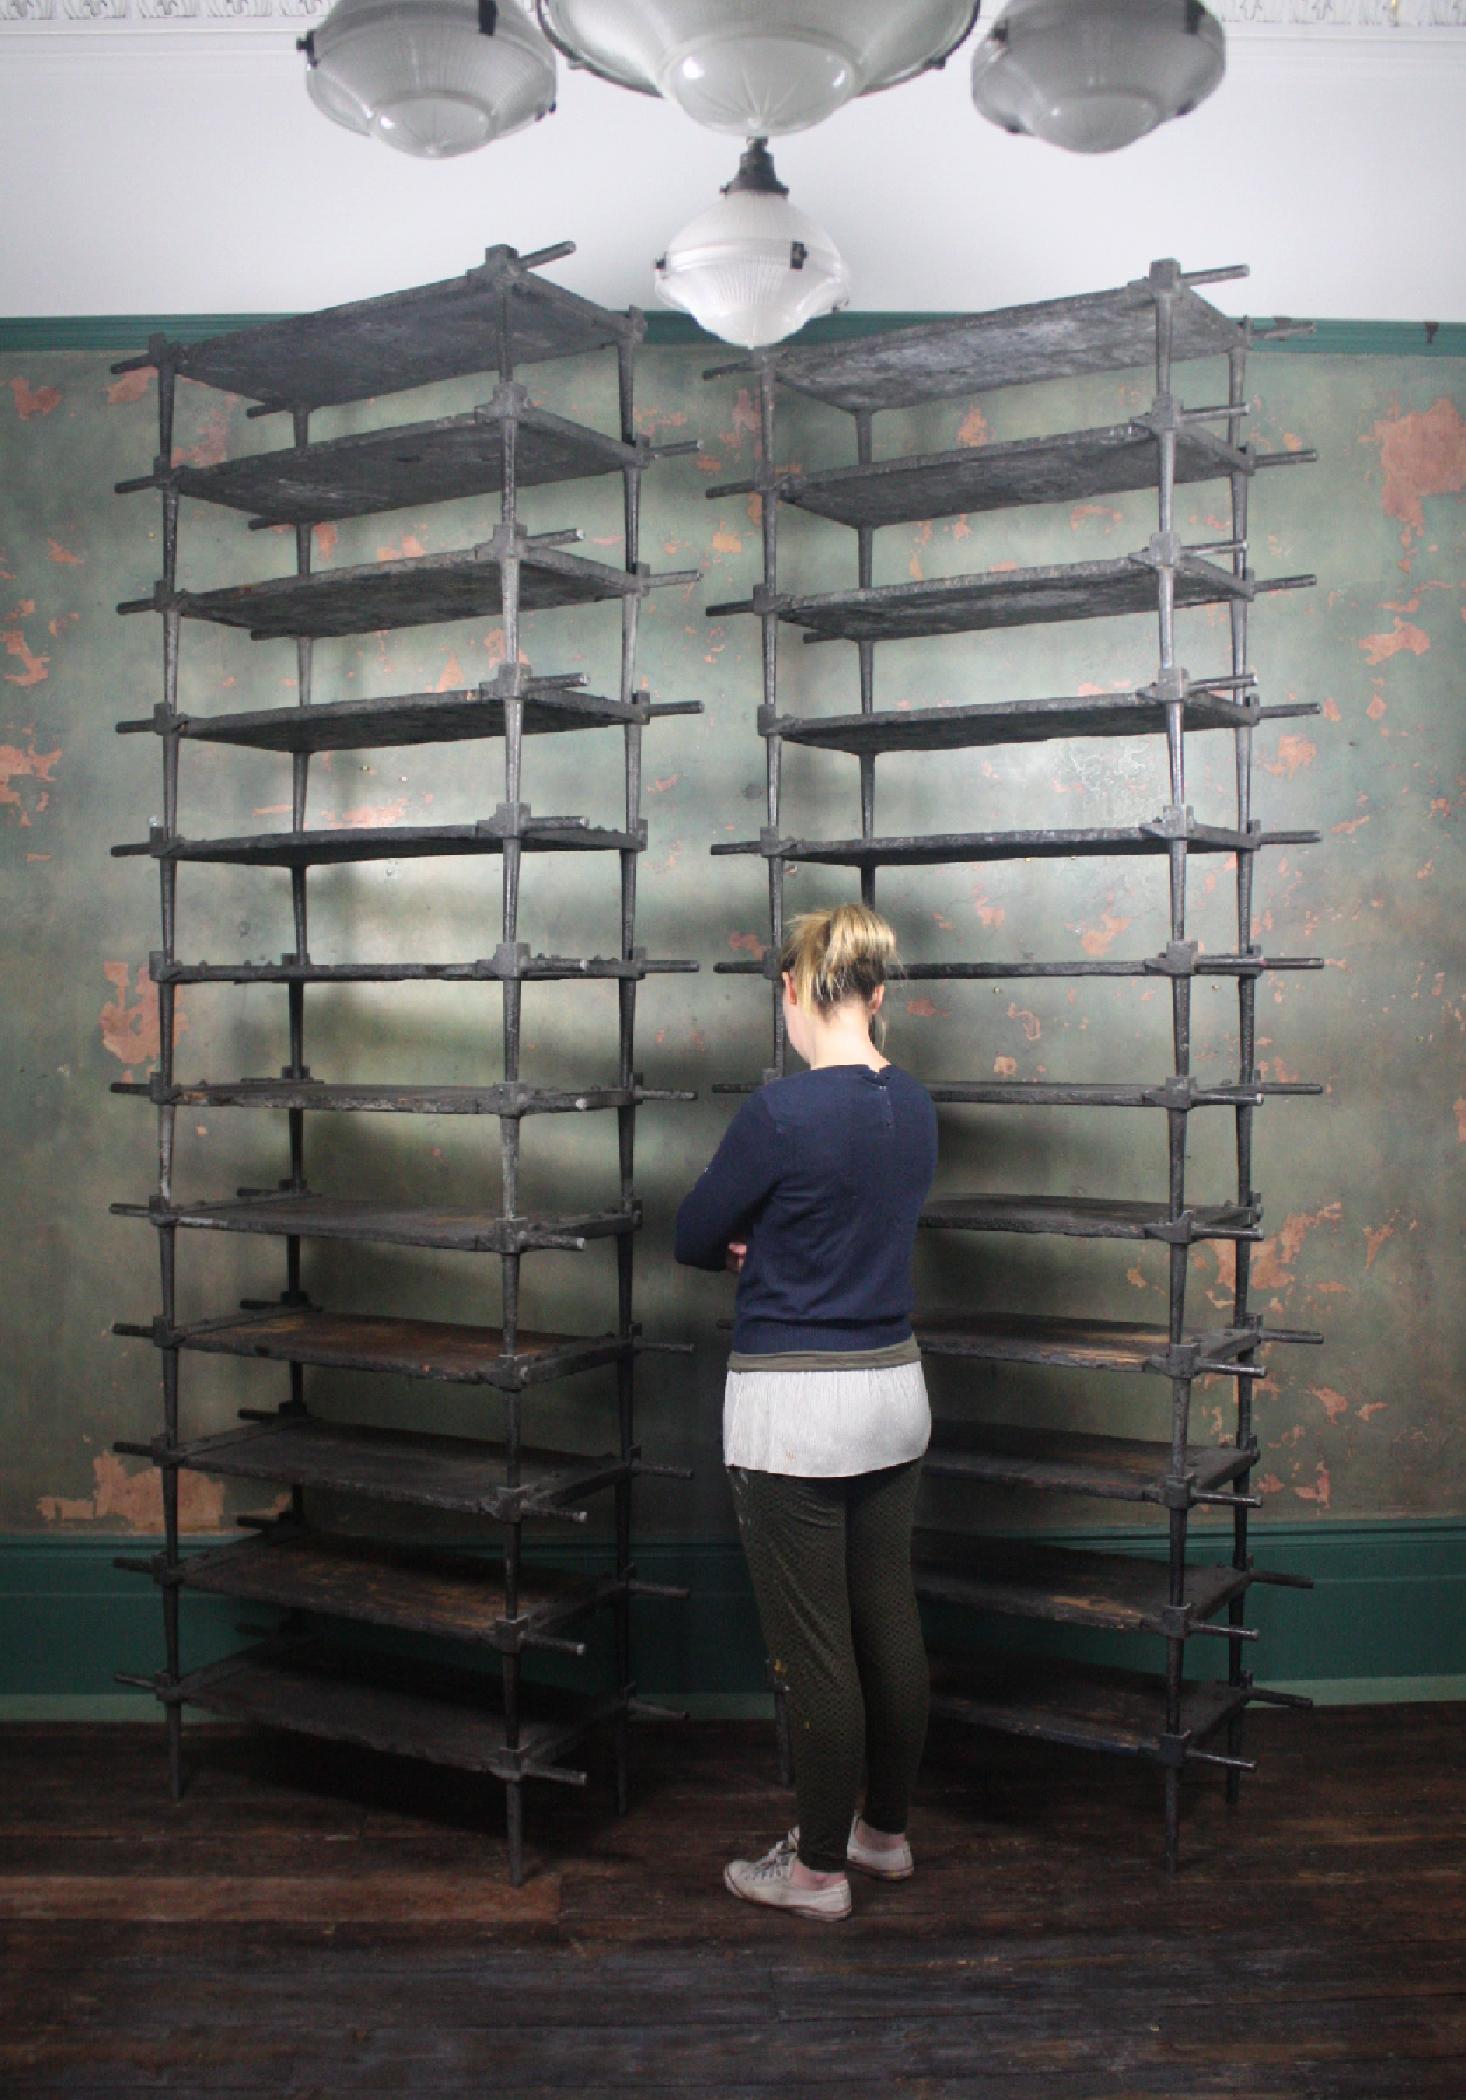 English Collection of 24 Victorian Foundry Cooling Racks Shelves Blacksmith